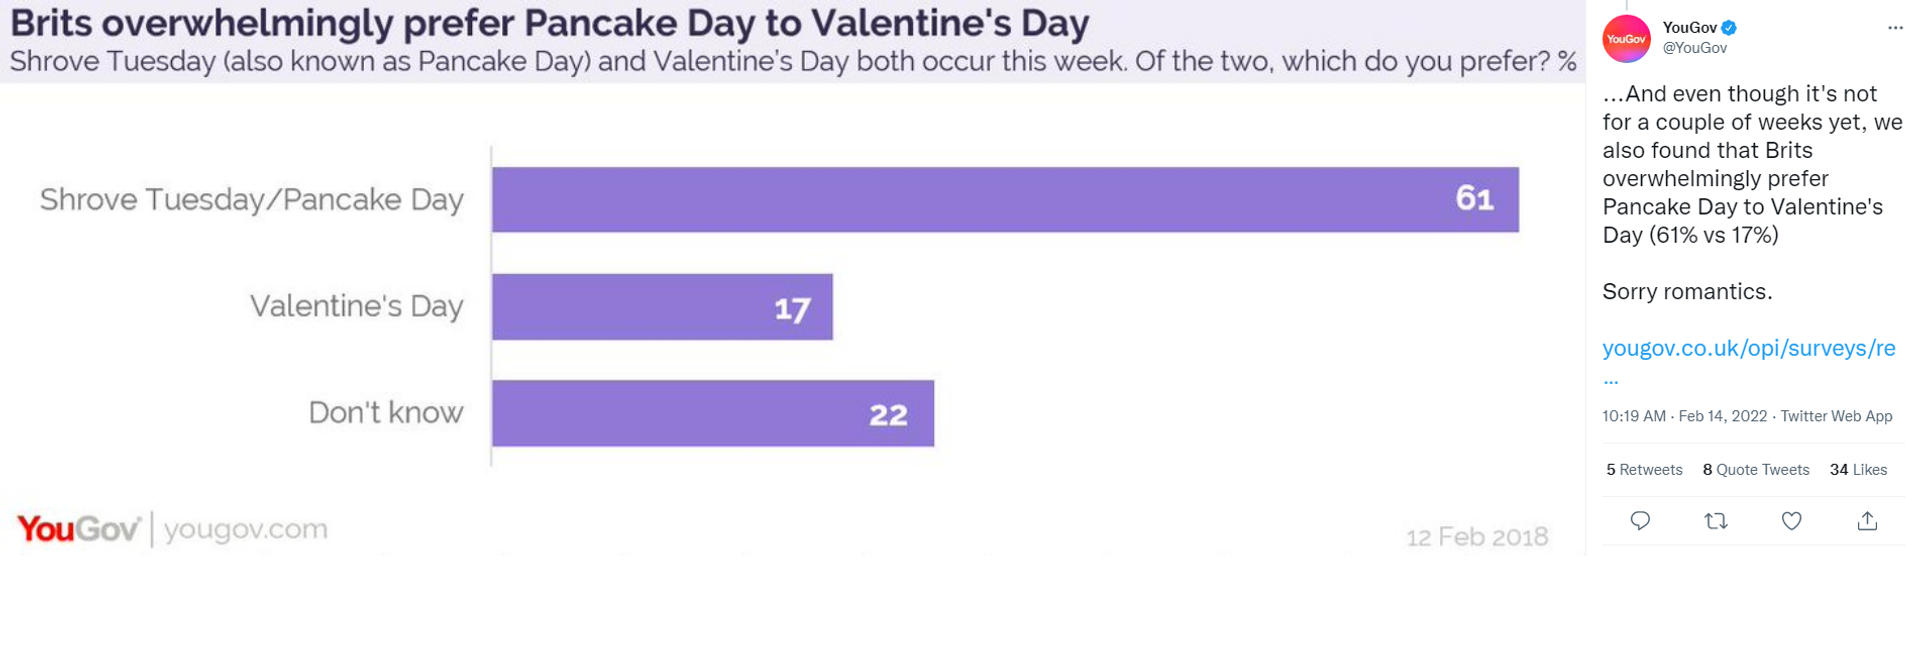 YouGov polling on British people's preference between Valentine's Day and Shrove Tuesday, commonly known as Pancake Day.   - Sputnik International, 1920, 14.02.2022